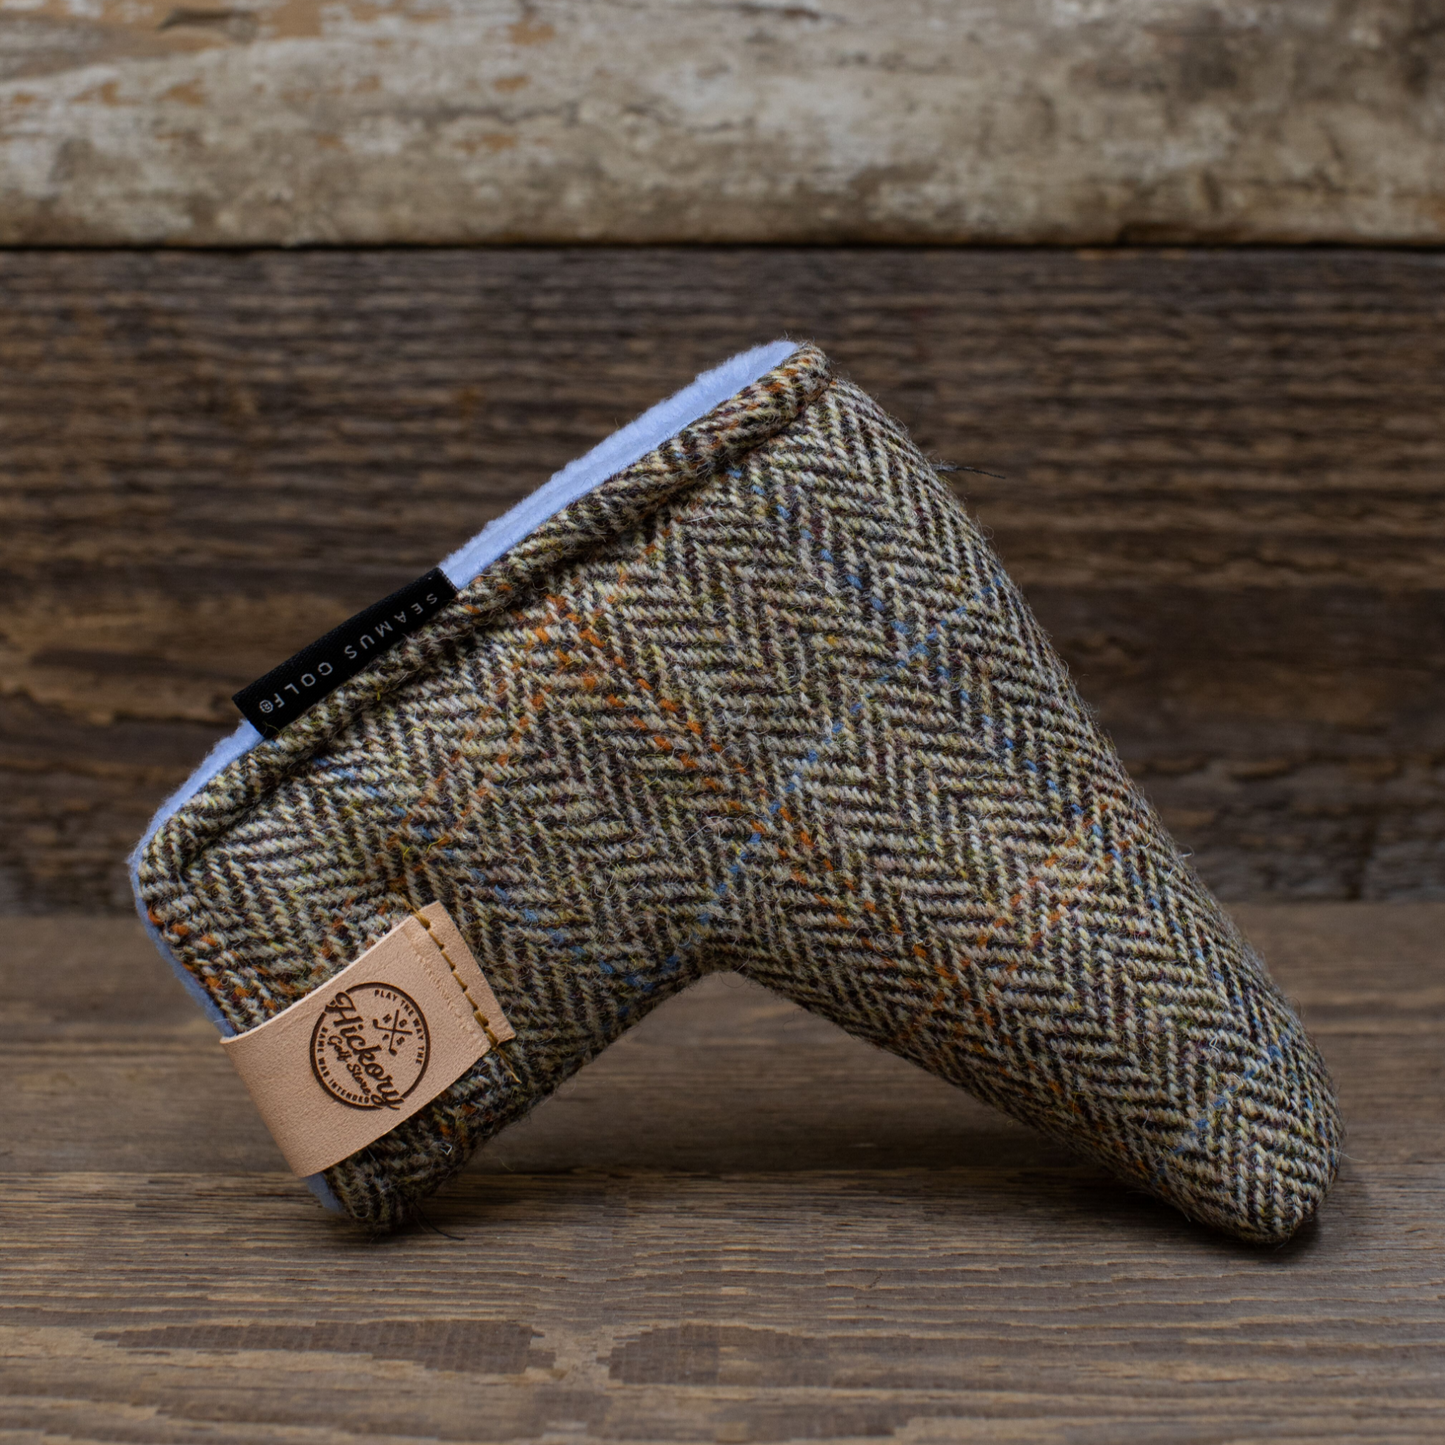 Seamus Golf - Blade Putter Head Cover made from Glen Plaid Harris Tweed Wool with Magnet Closure side view